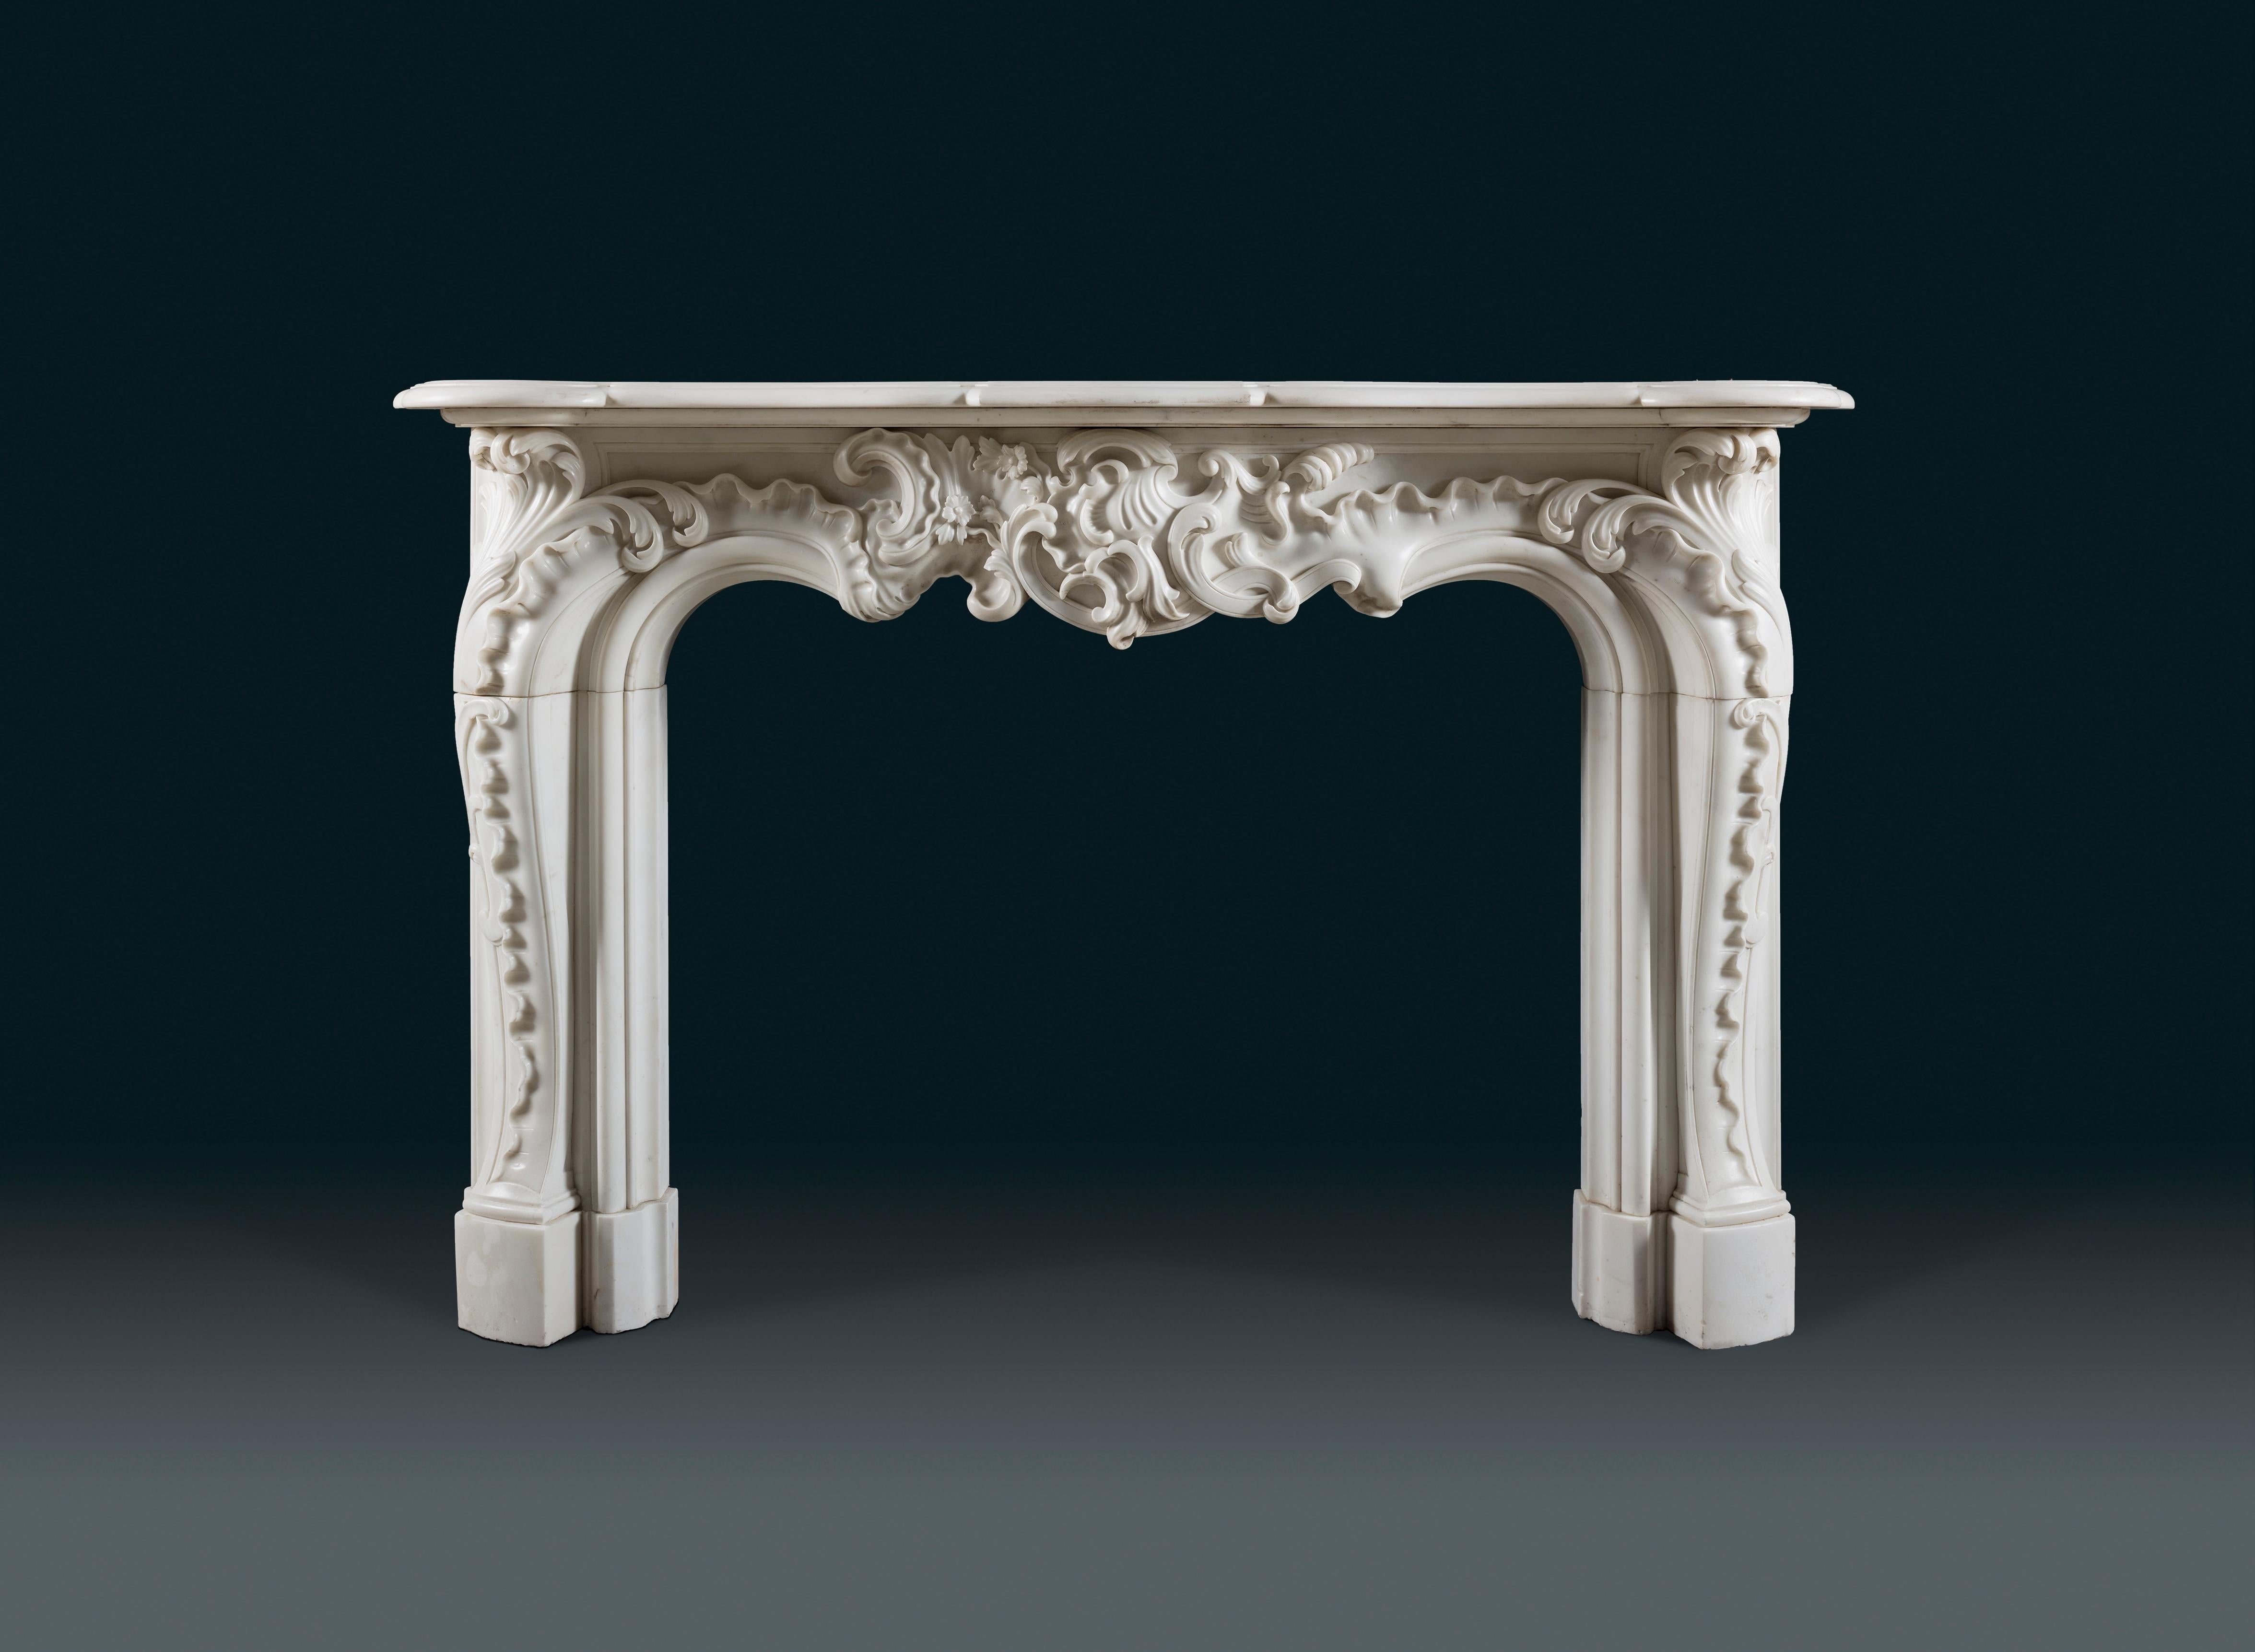 Rococo Revival A Rococo 19th century chimneypiece of very large scale in white statuary marble. For Sale